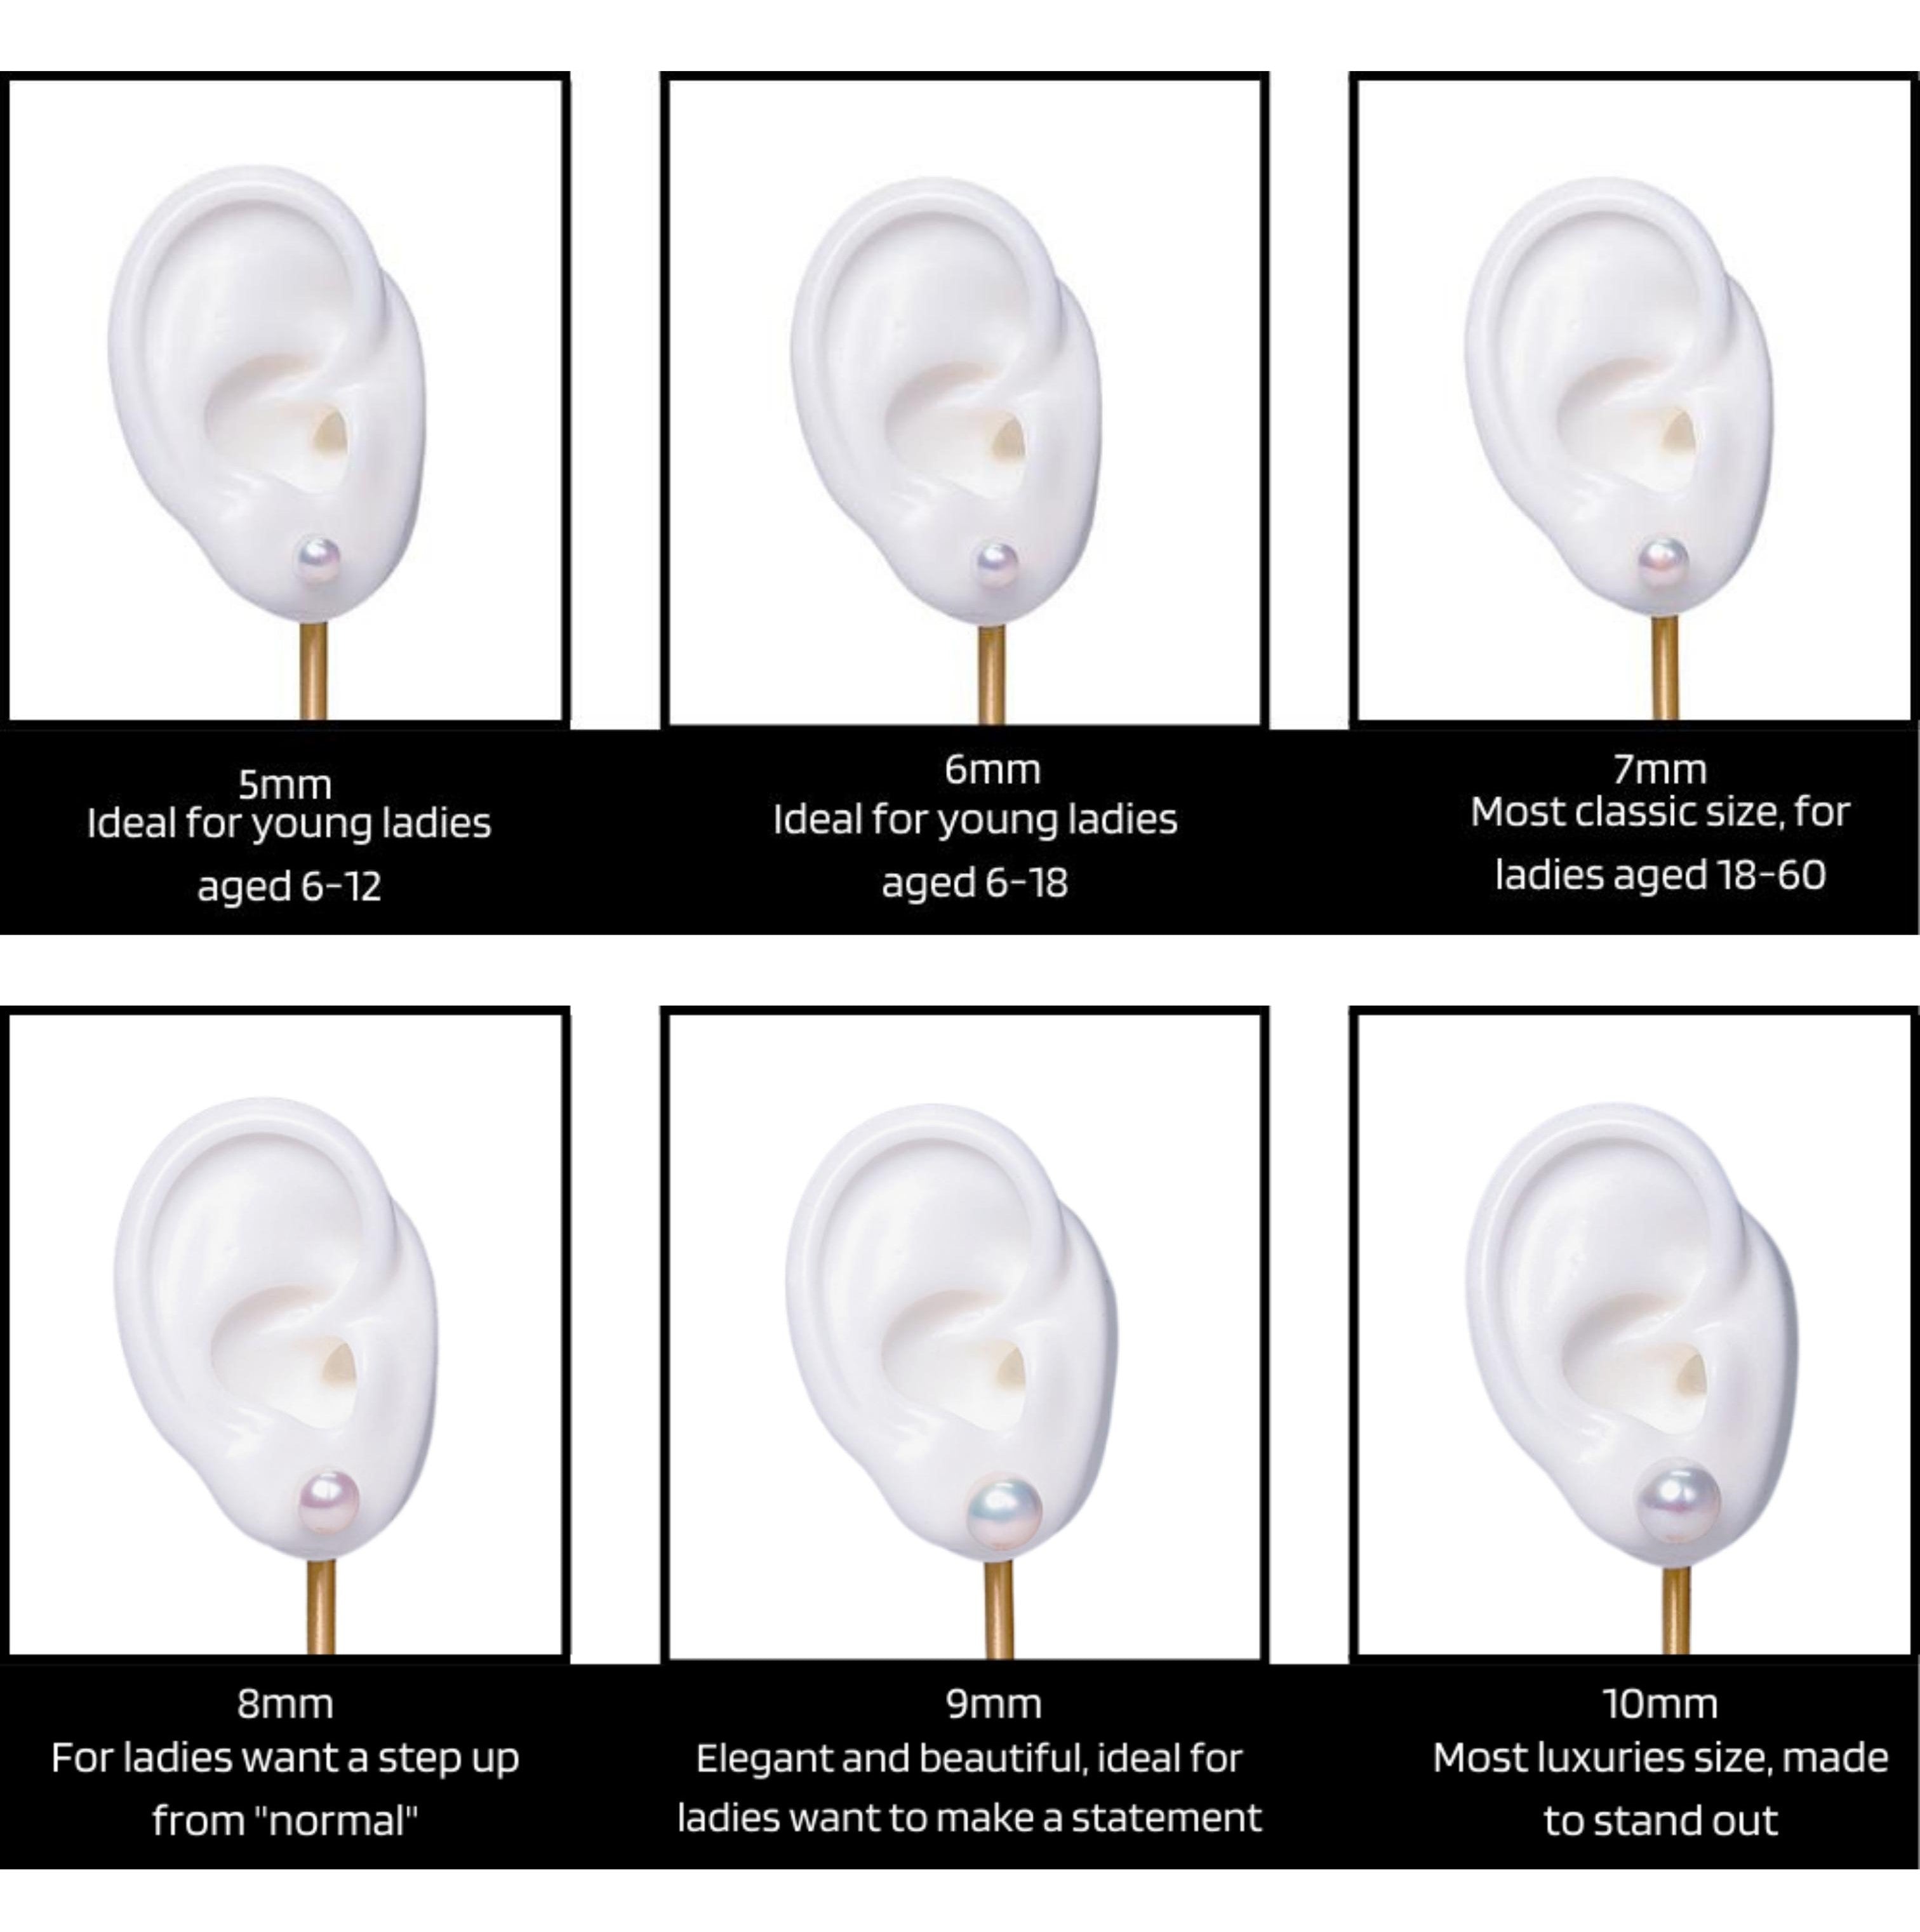 hoop earring size chart - Yahoo Search Results | Size chart, Earrings, Baby  earrings